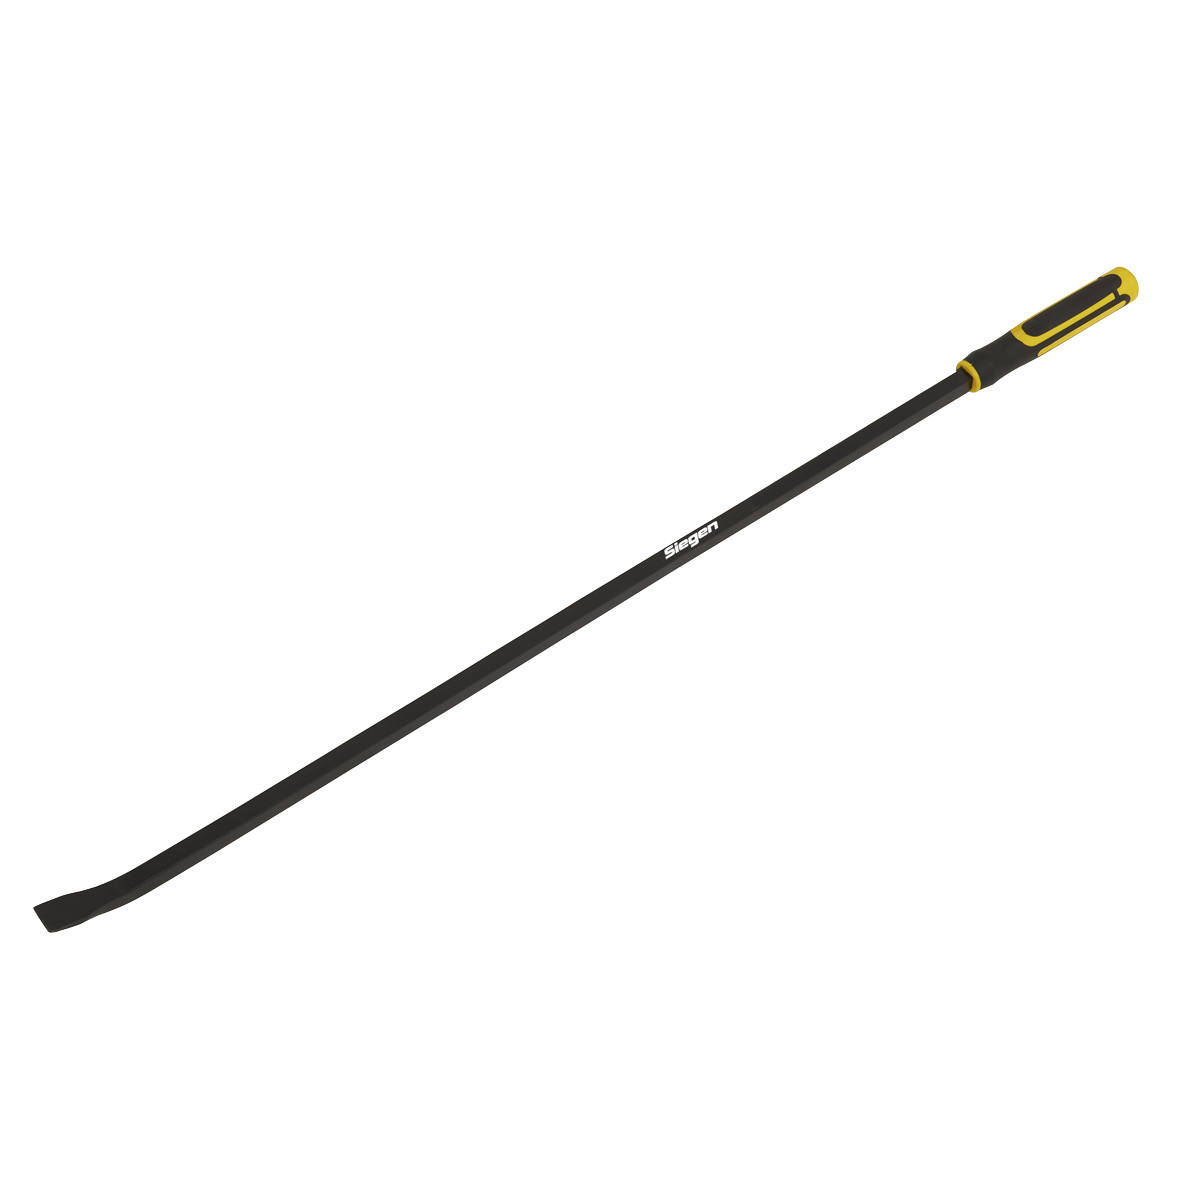 Pry Bar 25° Heavy-Duty 1220mm with Hammer Cap - S01192 - Farming Parts